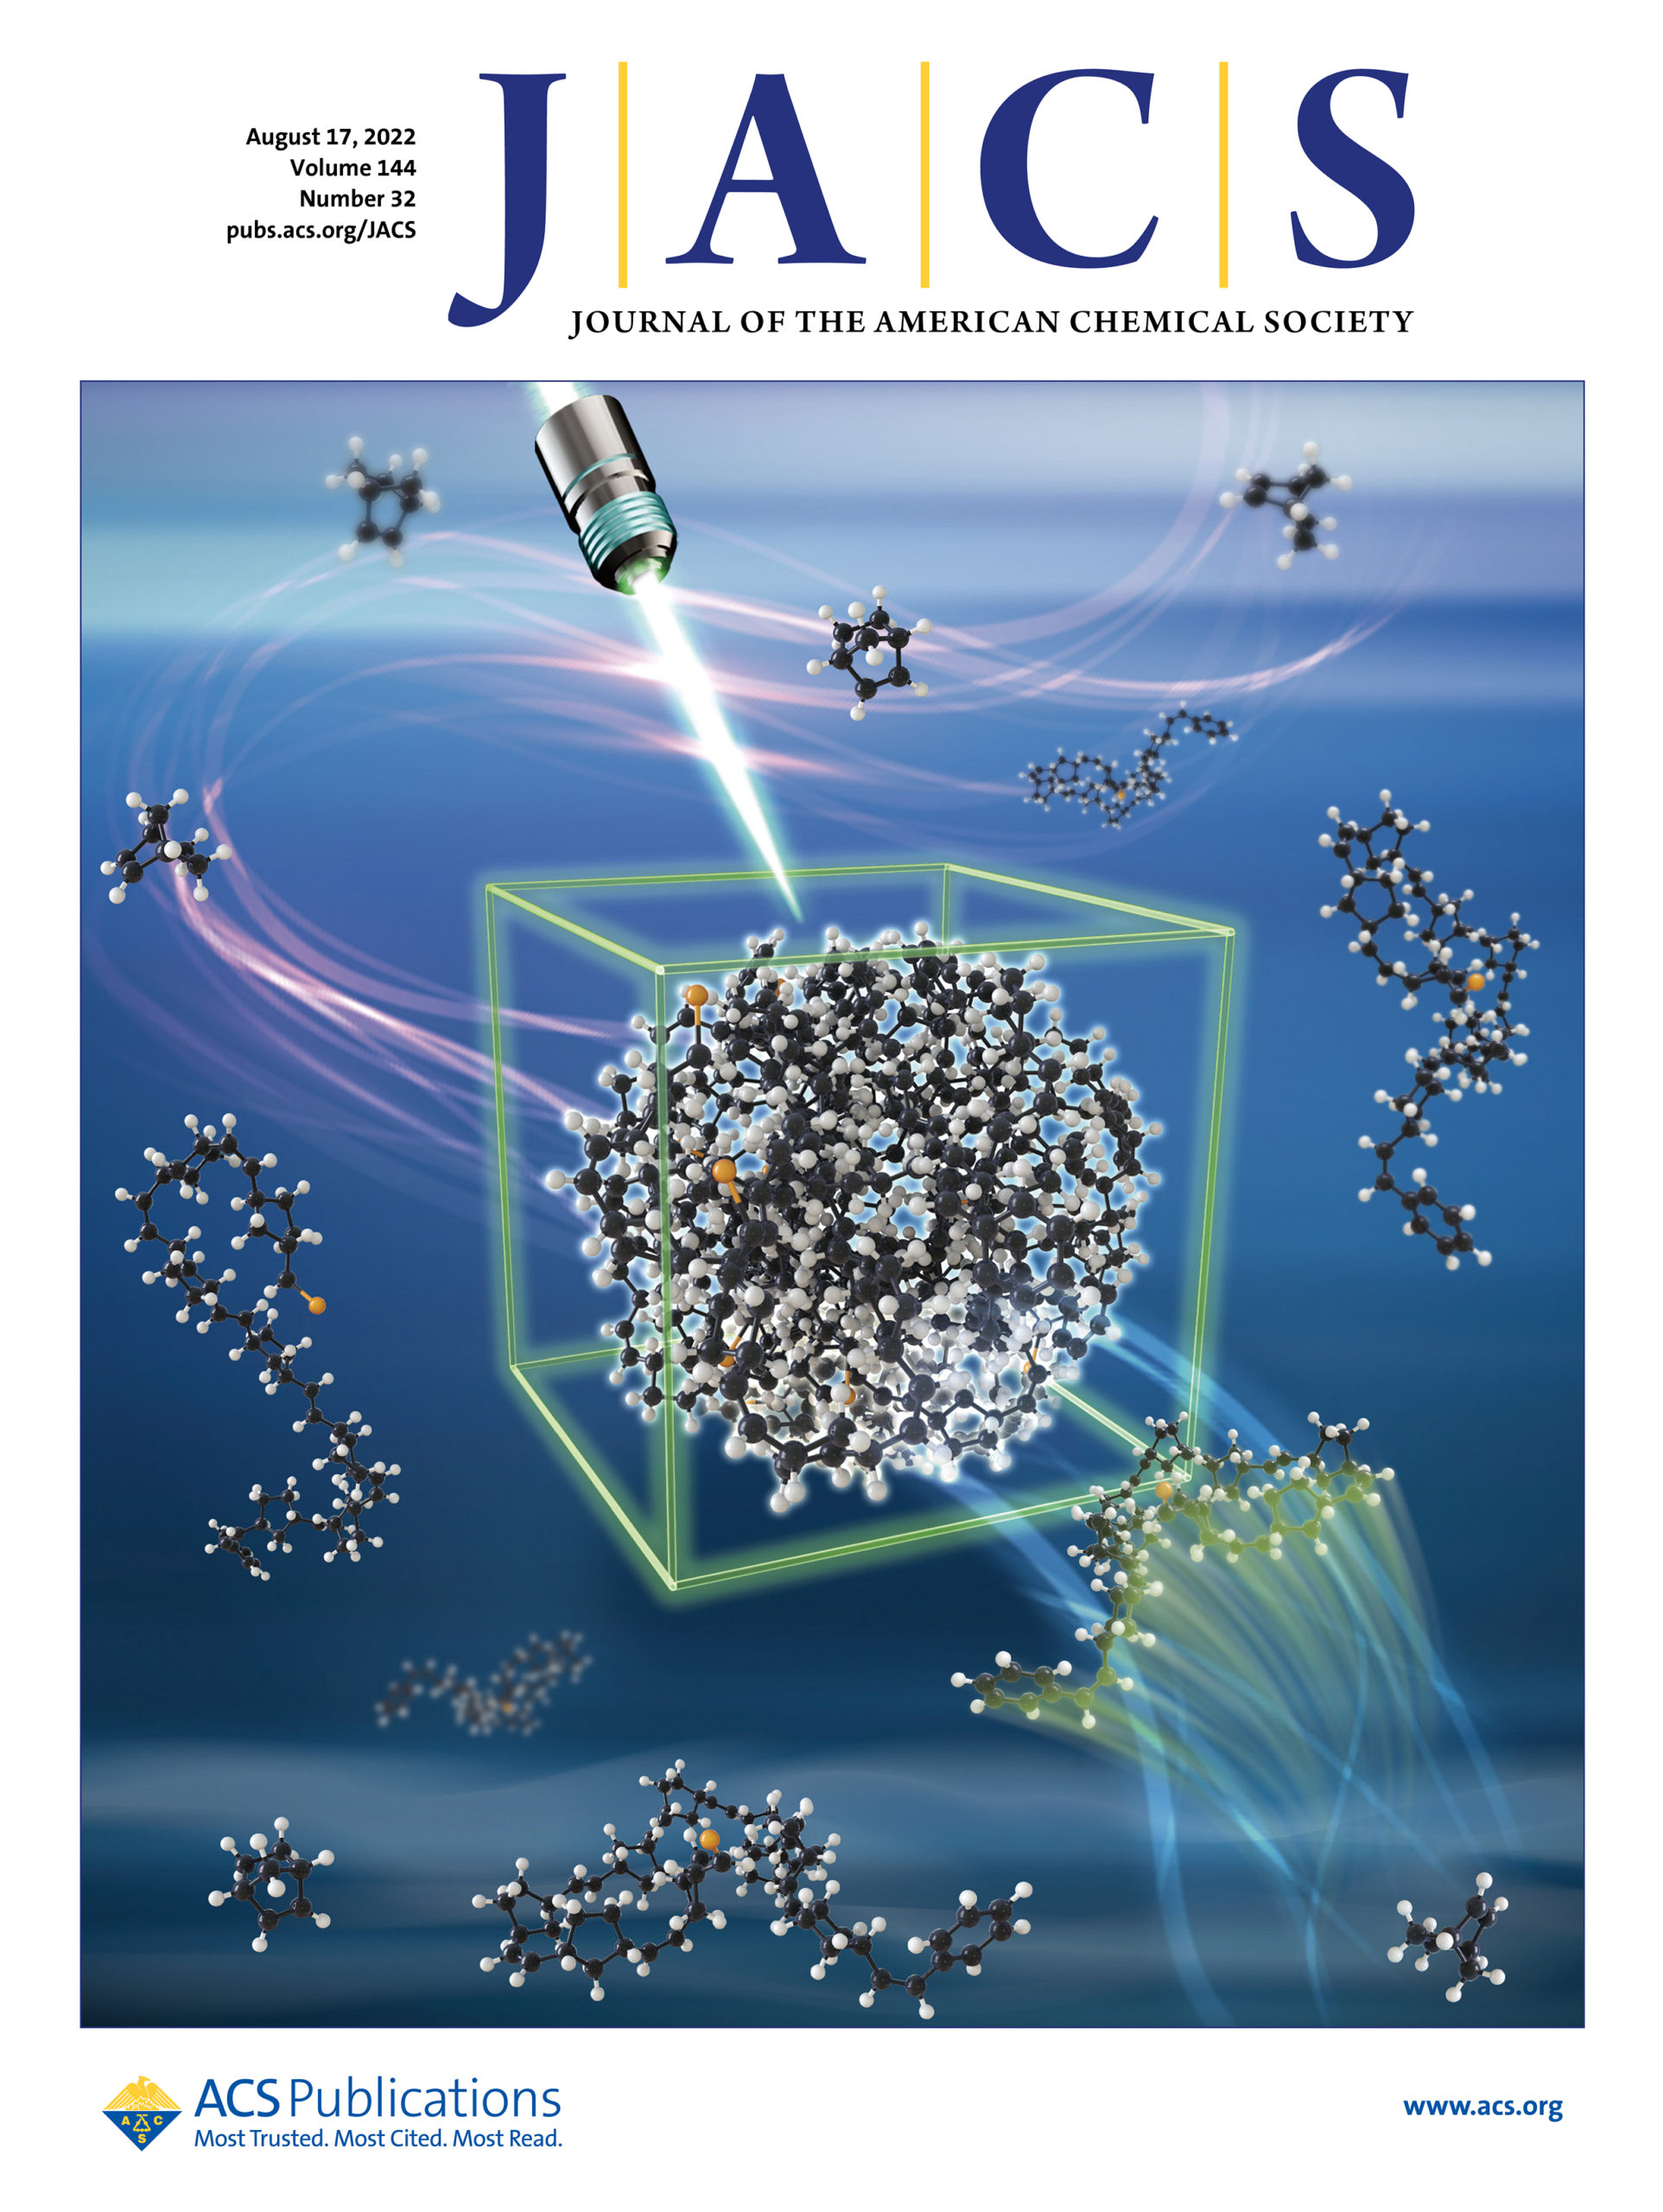 Shawn's work featured on the cover of JACS! Welsher Lab Duke